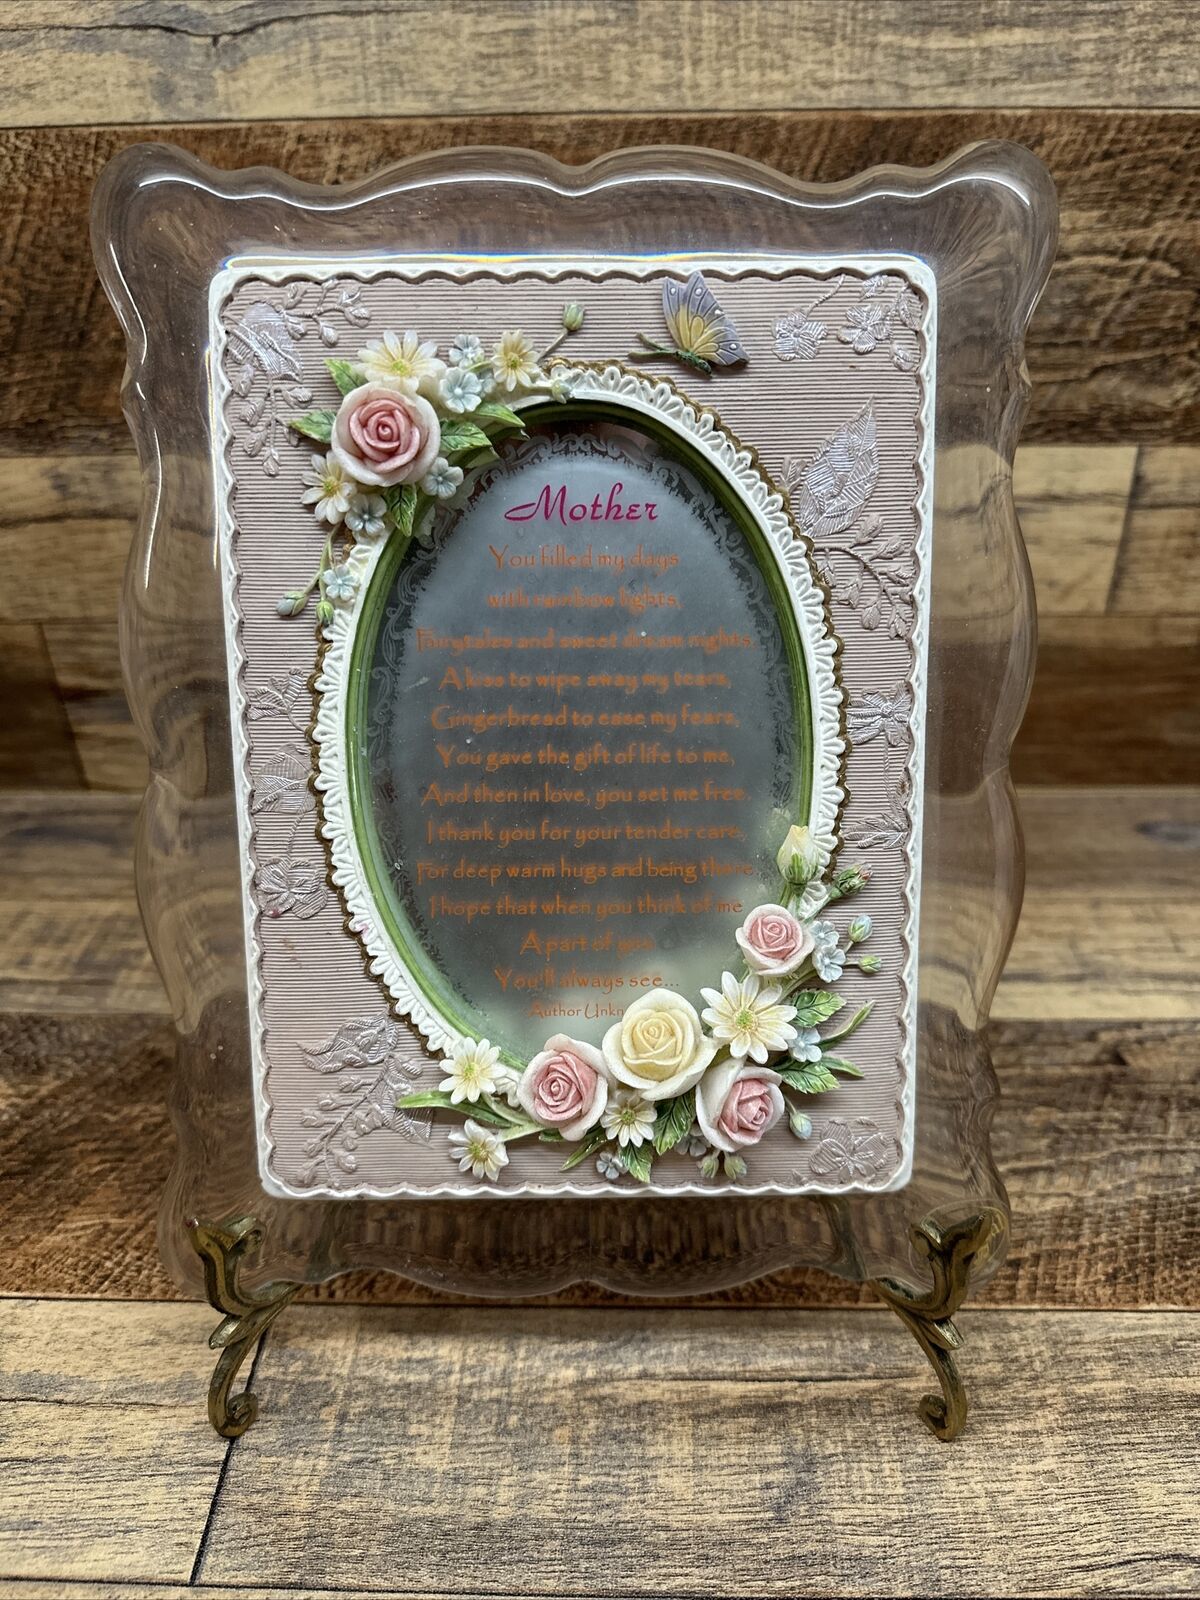 Mother Picture Poem.Frame With Music Box. The Wind Beneath My Wings With Stand